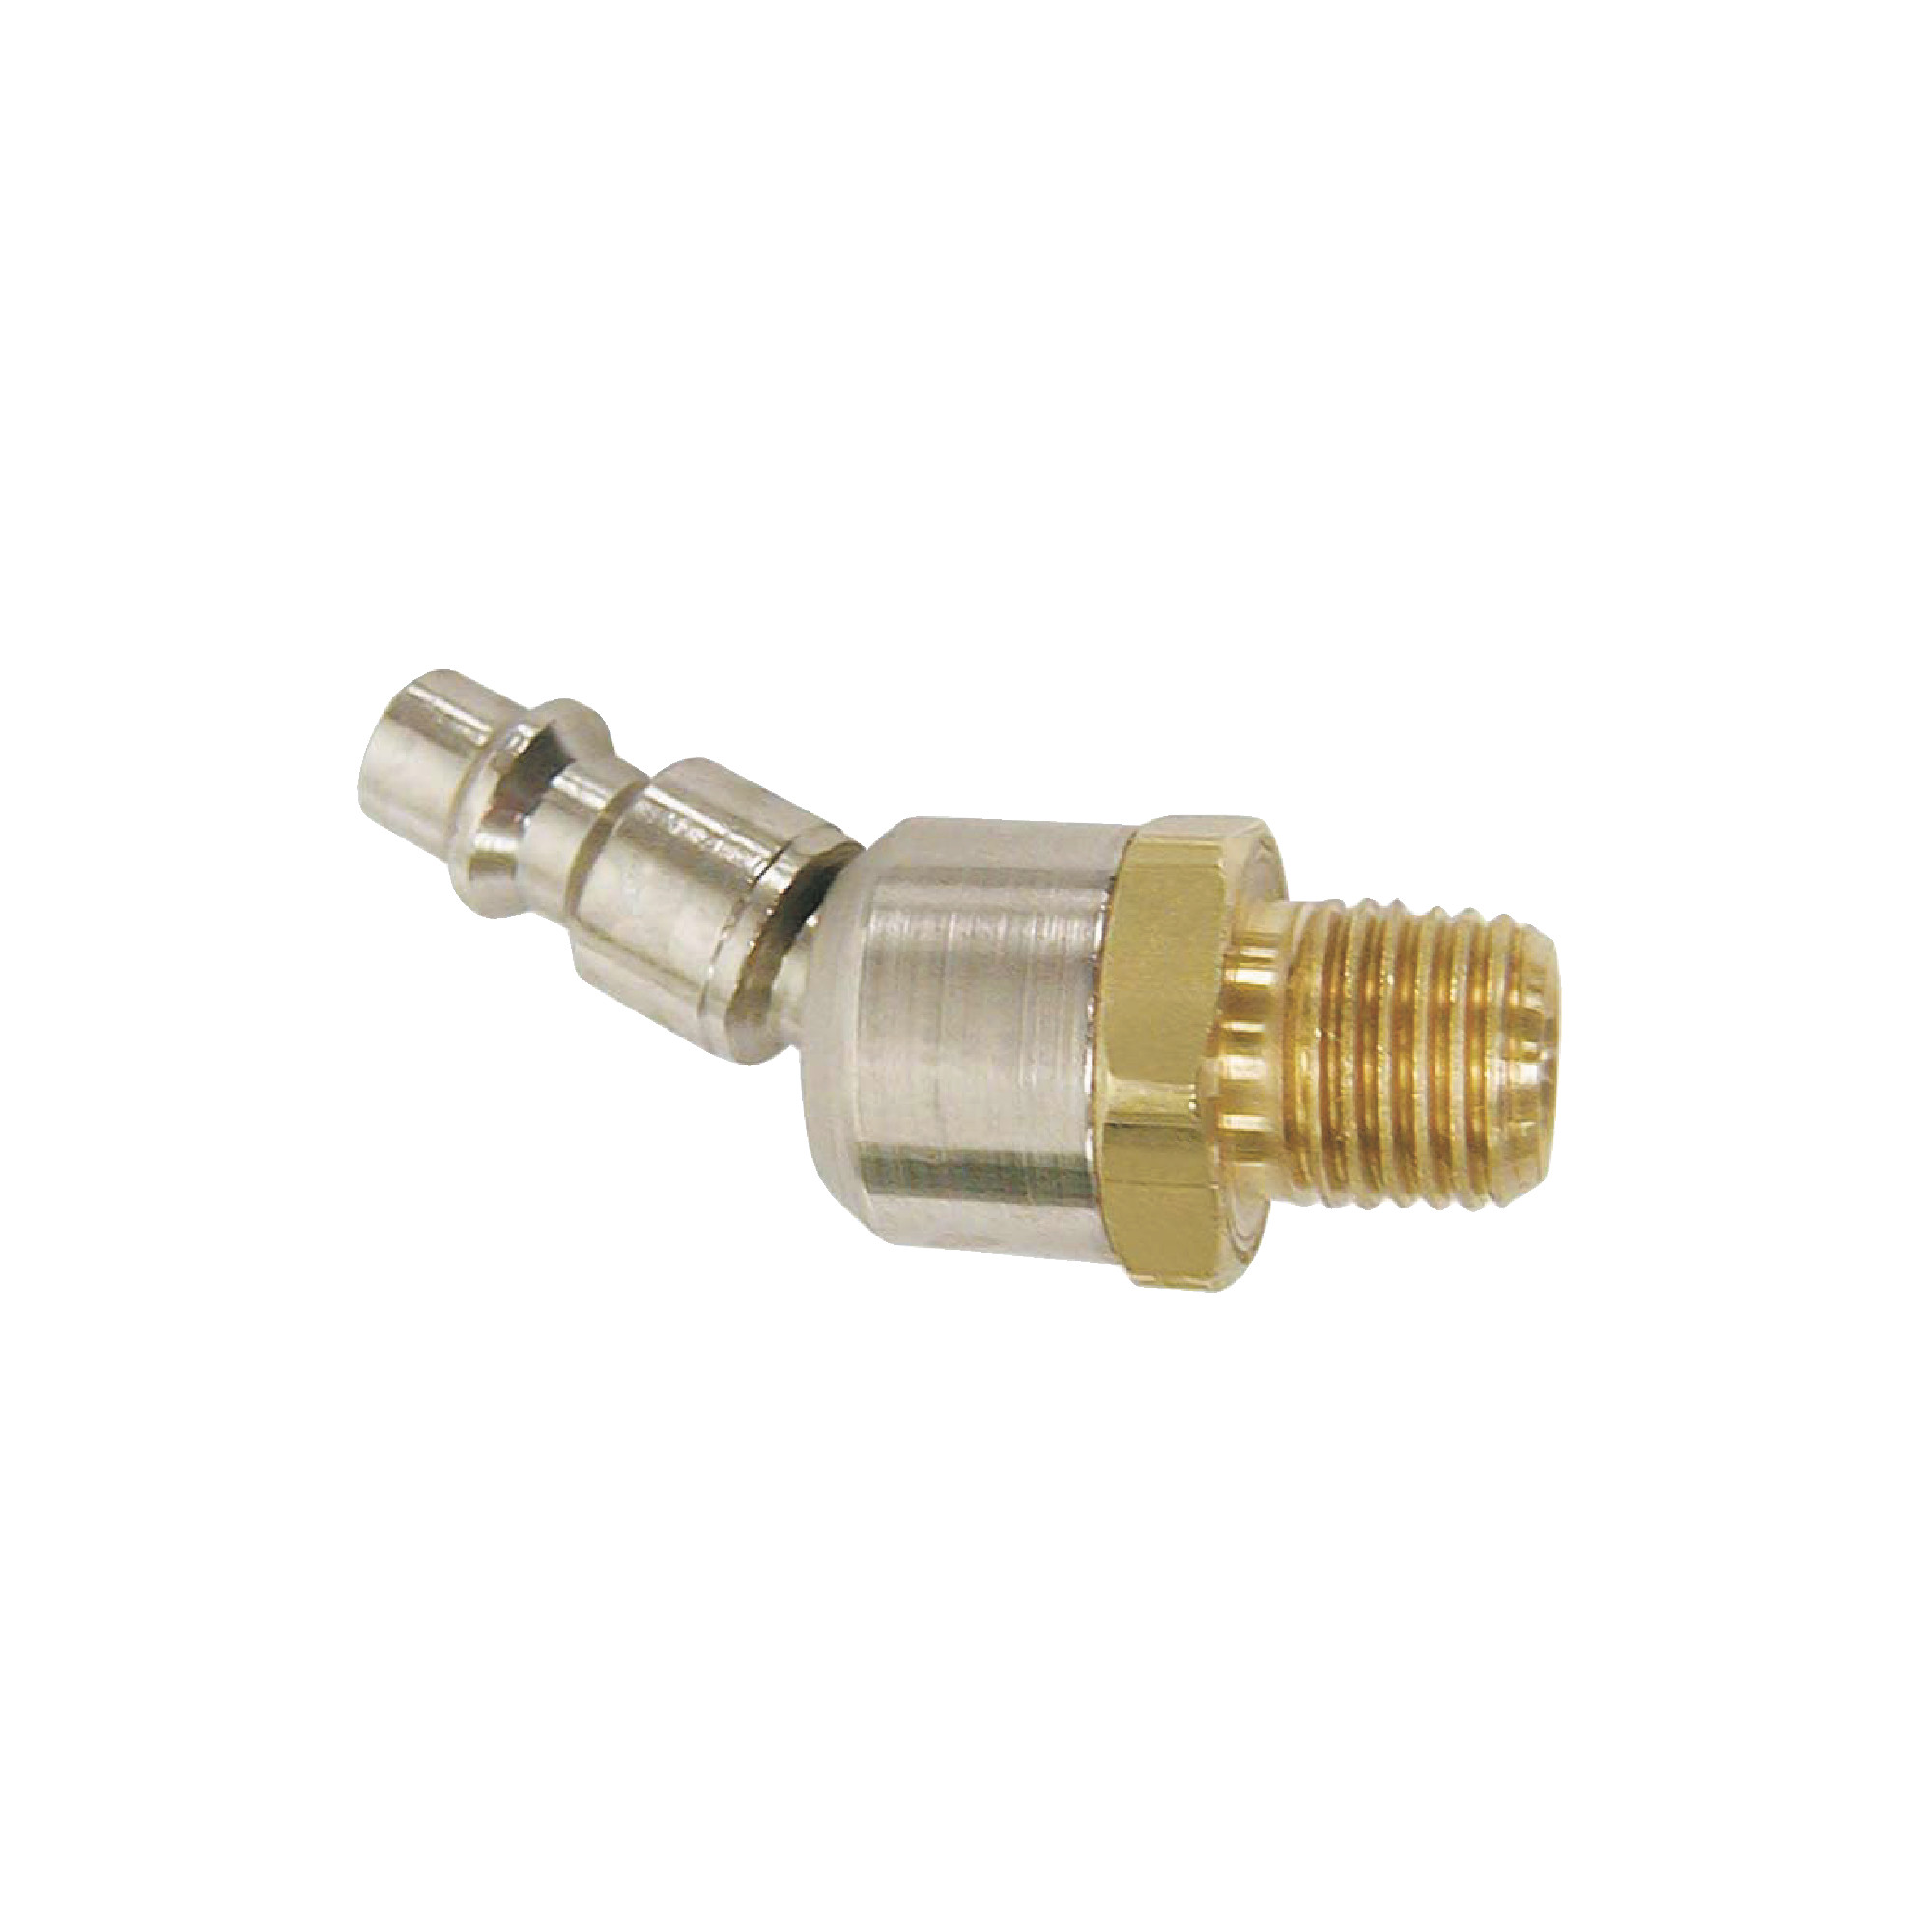 1/4" Industrial Ball Swivel Connector, 1/4" MPT